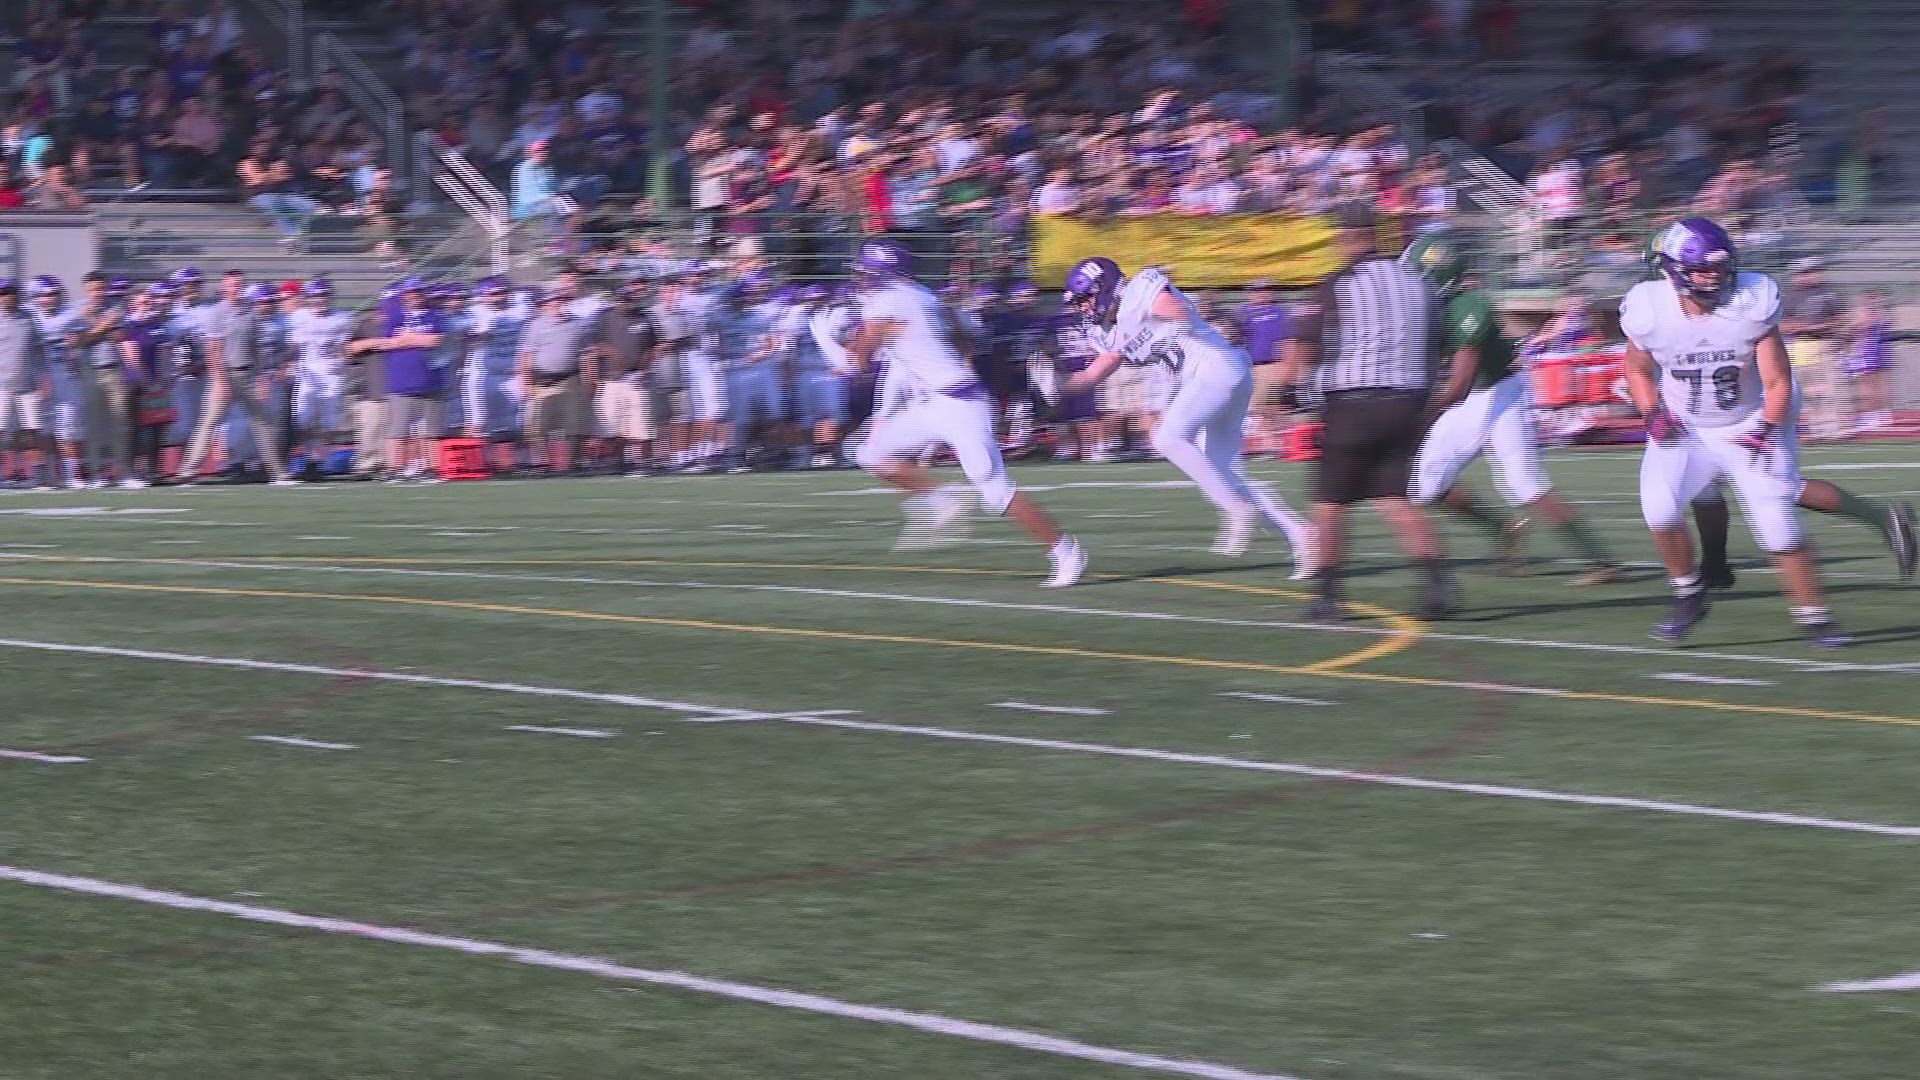 Highlights of Heritage's 35-28 win over Evergreen